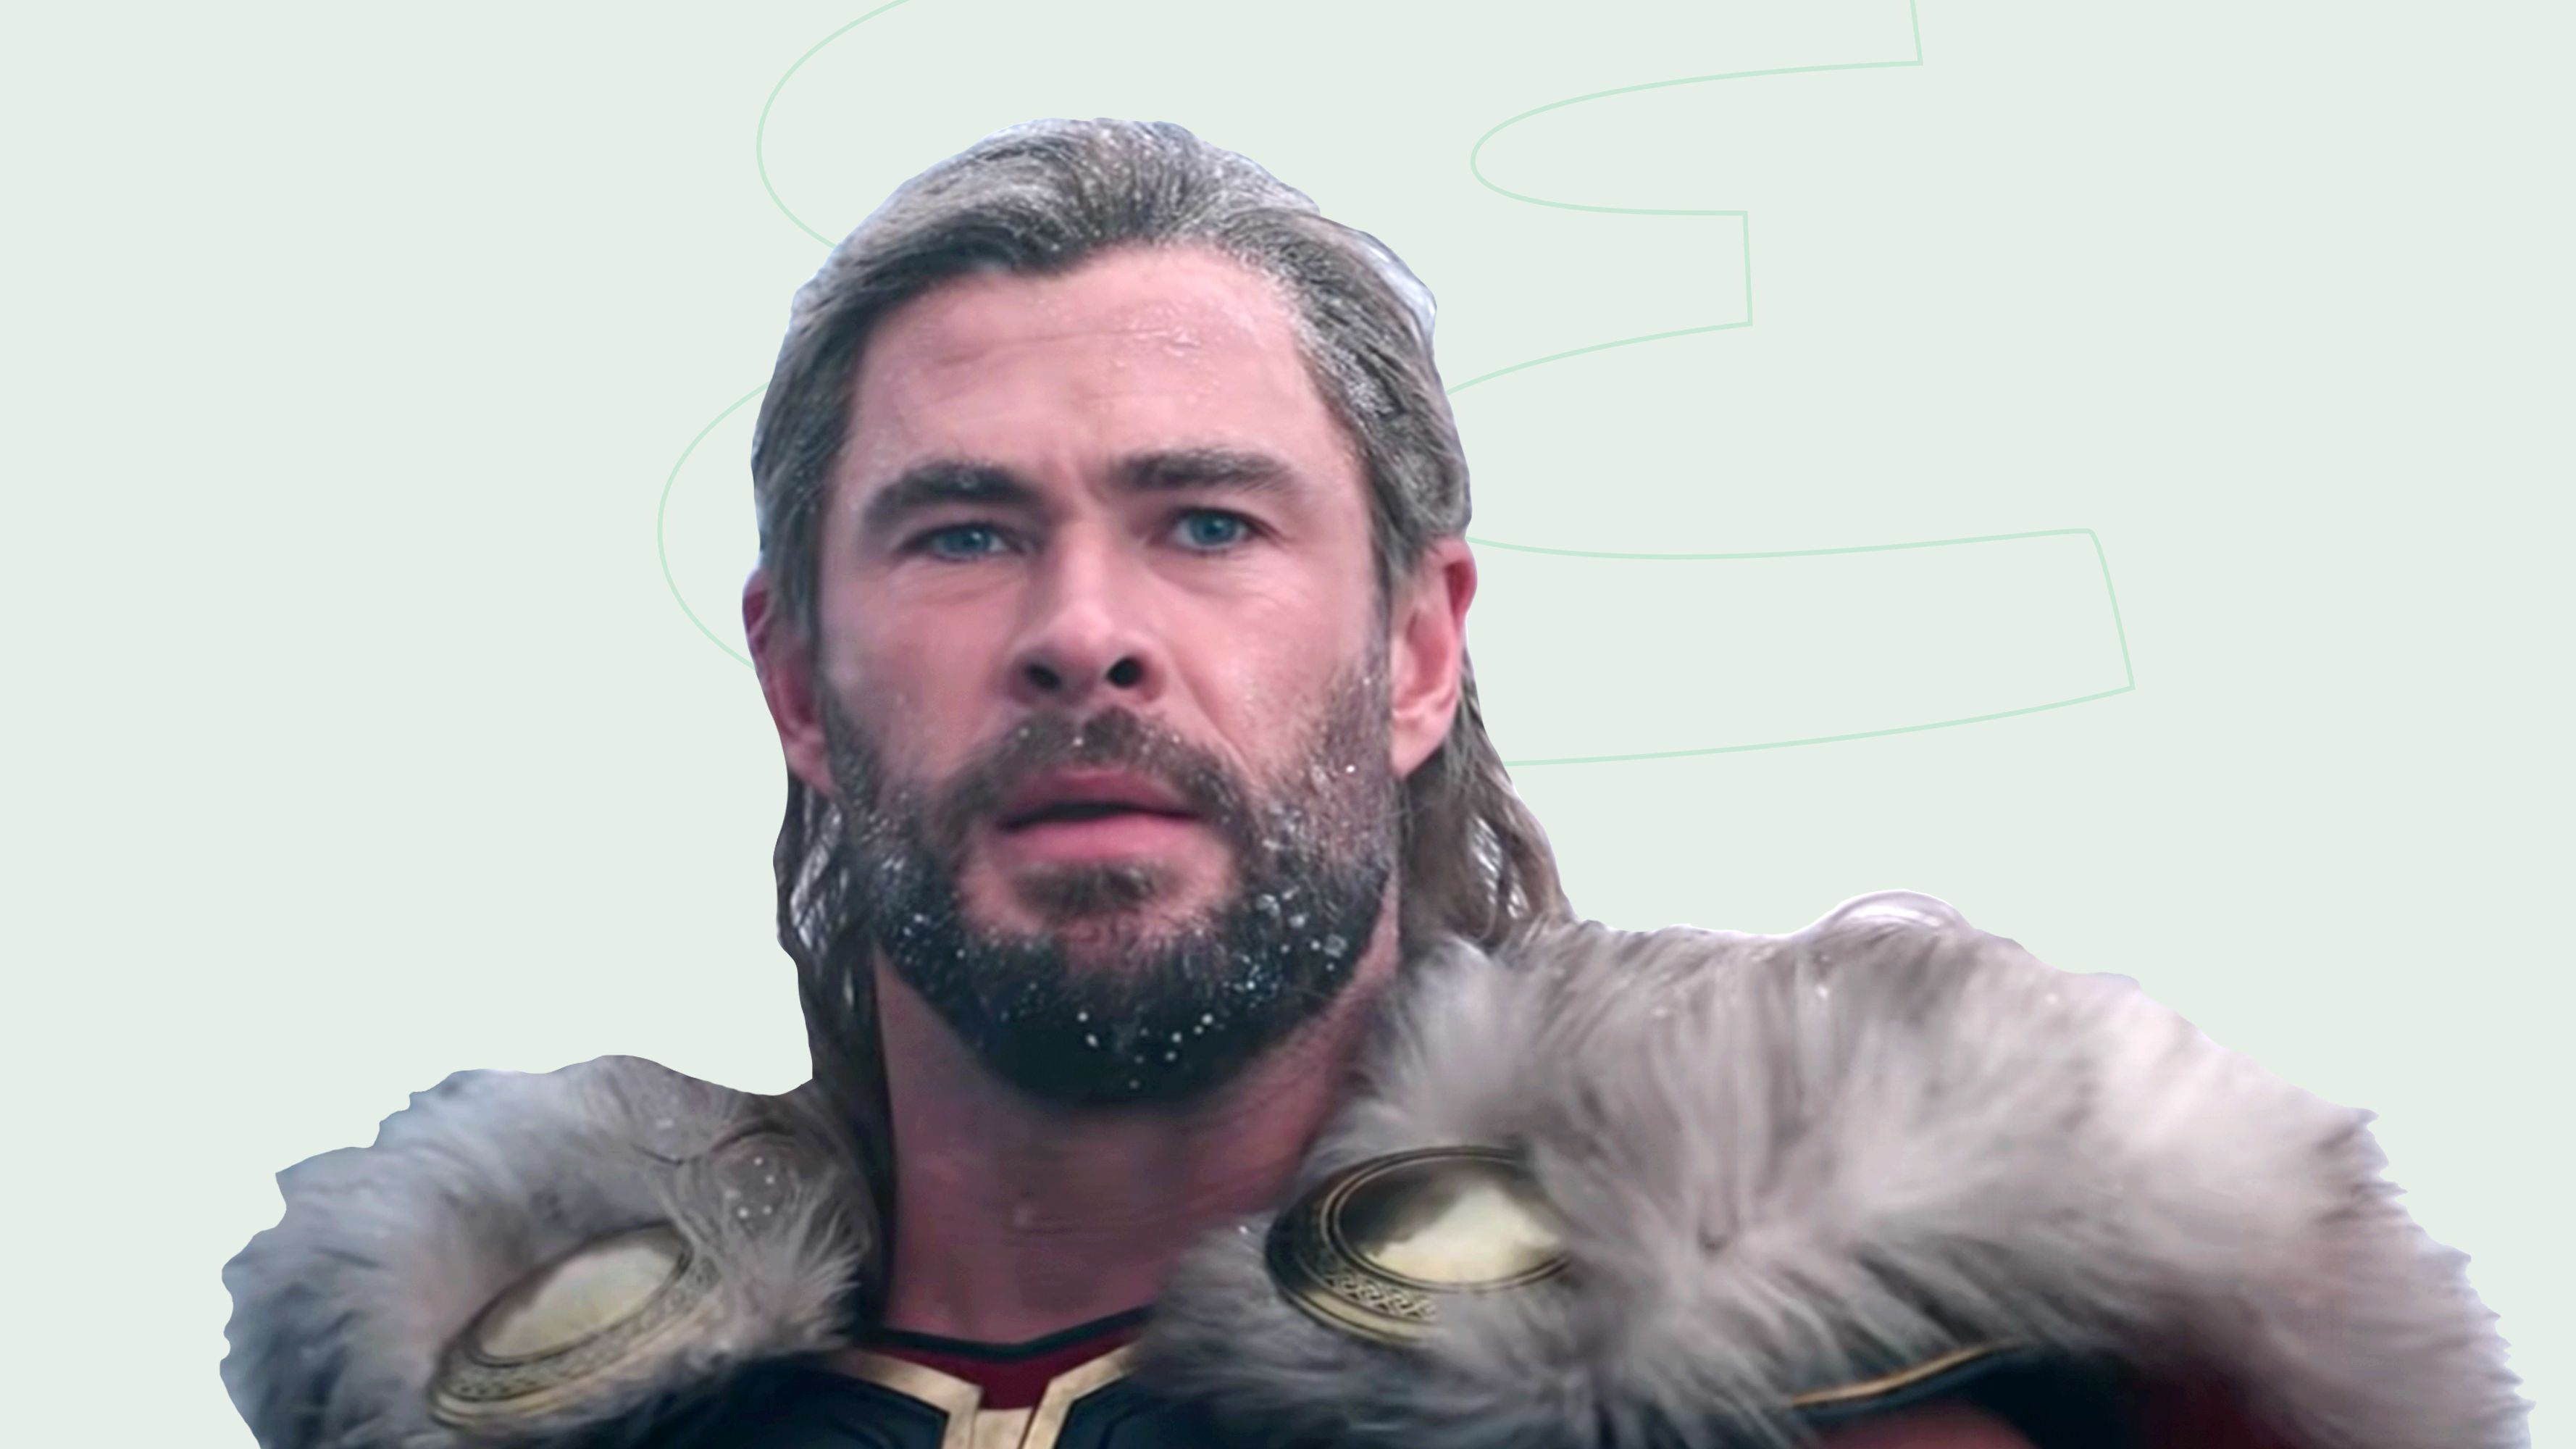 Here's What The Cast Of Thor: Love & Thunder Looked Like Then Vs